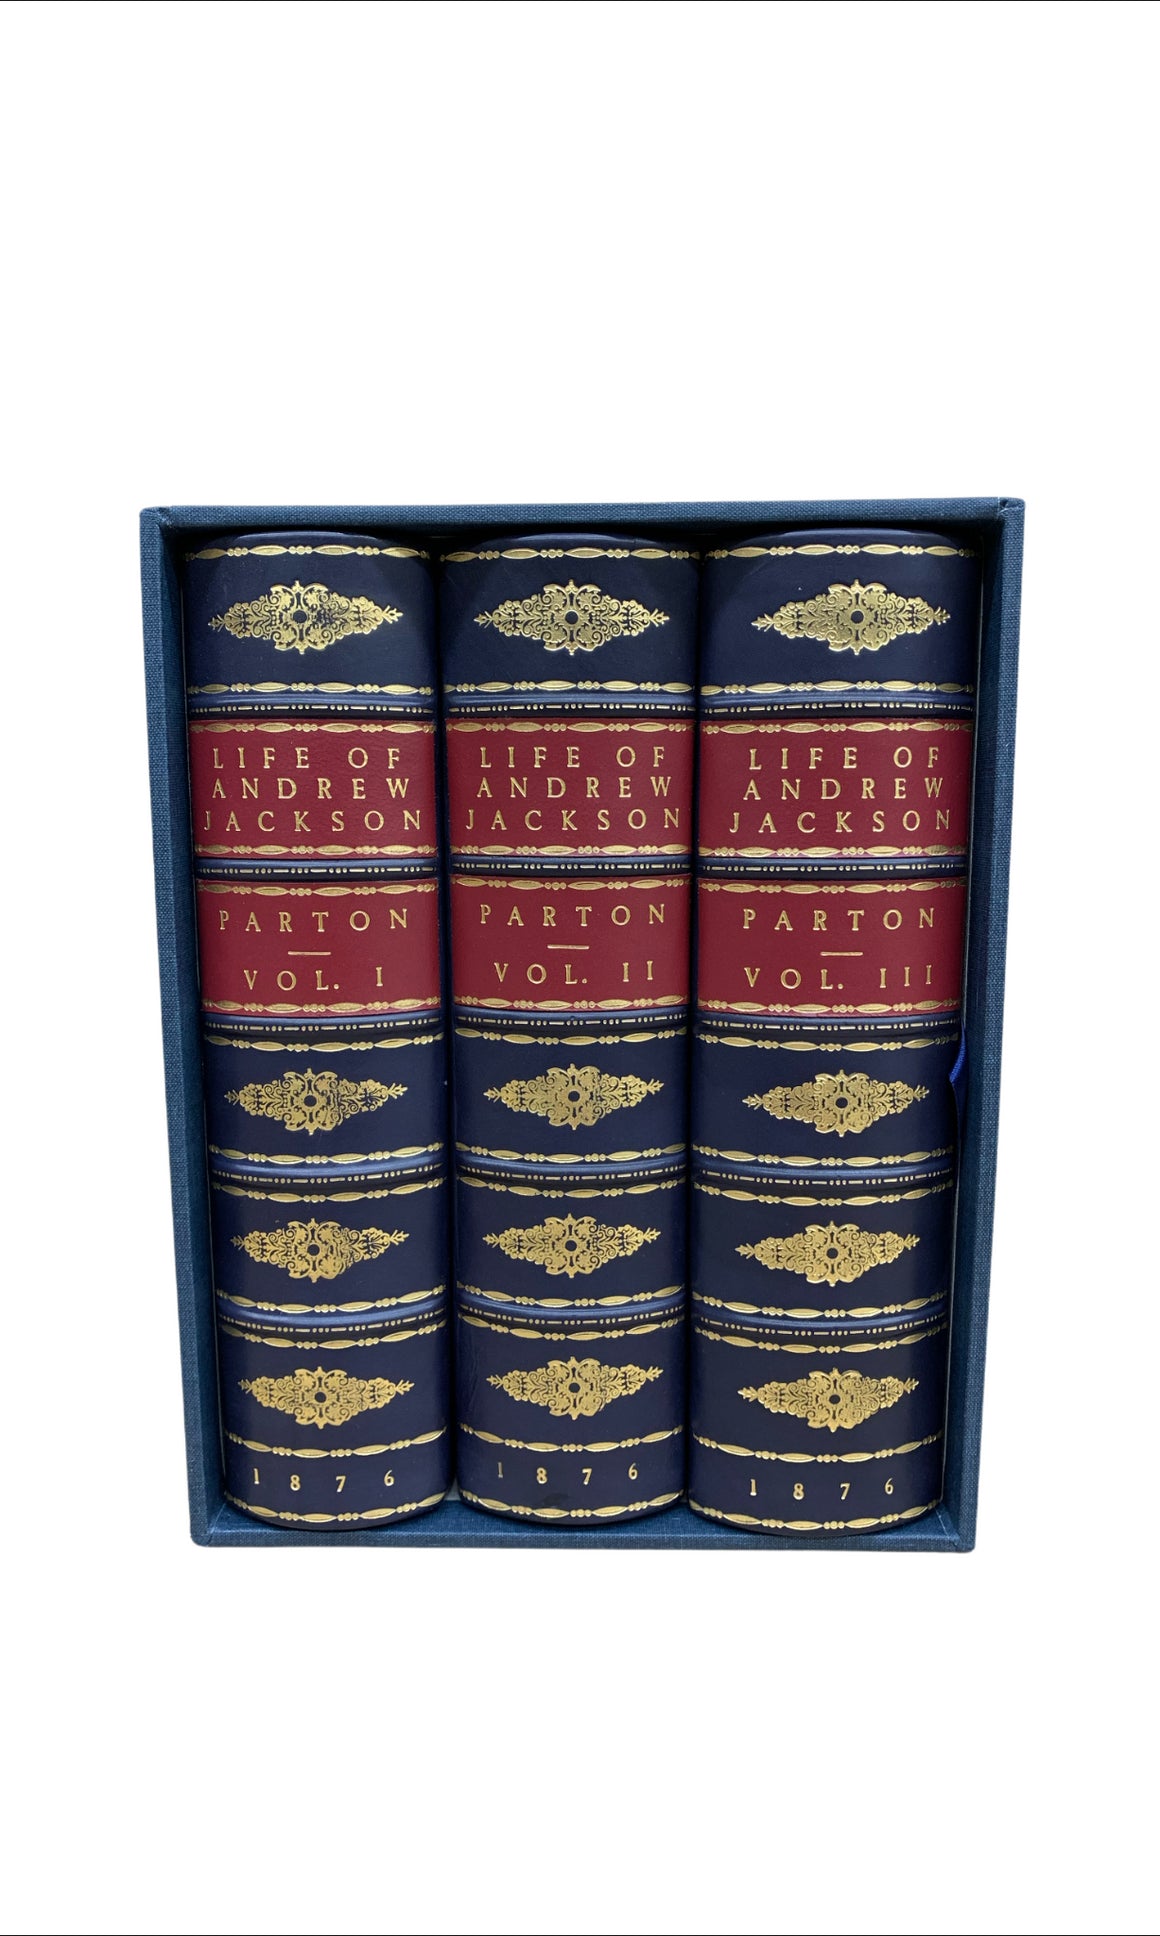 Life of Andrew Jackson by James Parton, Three Volumes, Later Printing, 1876